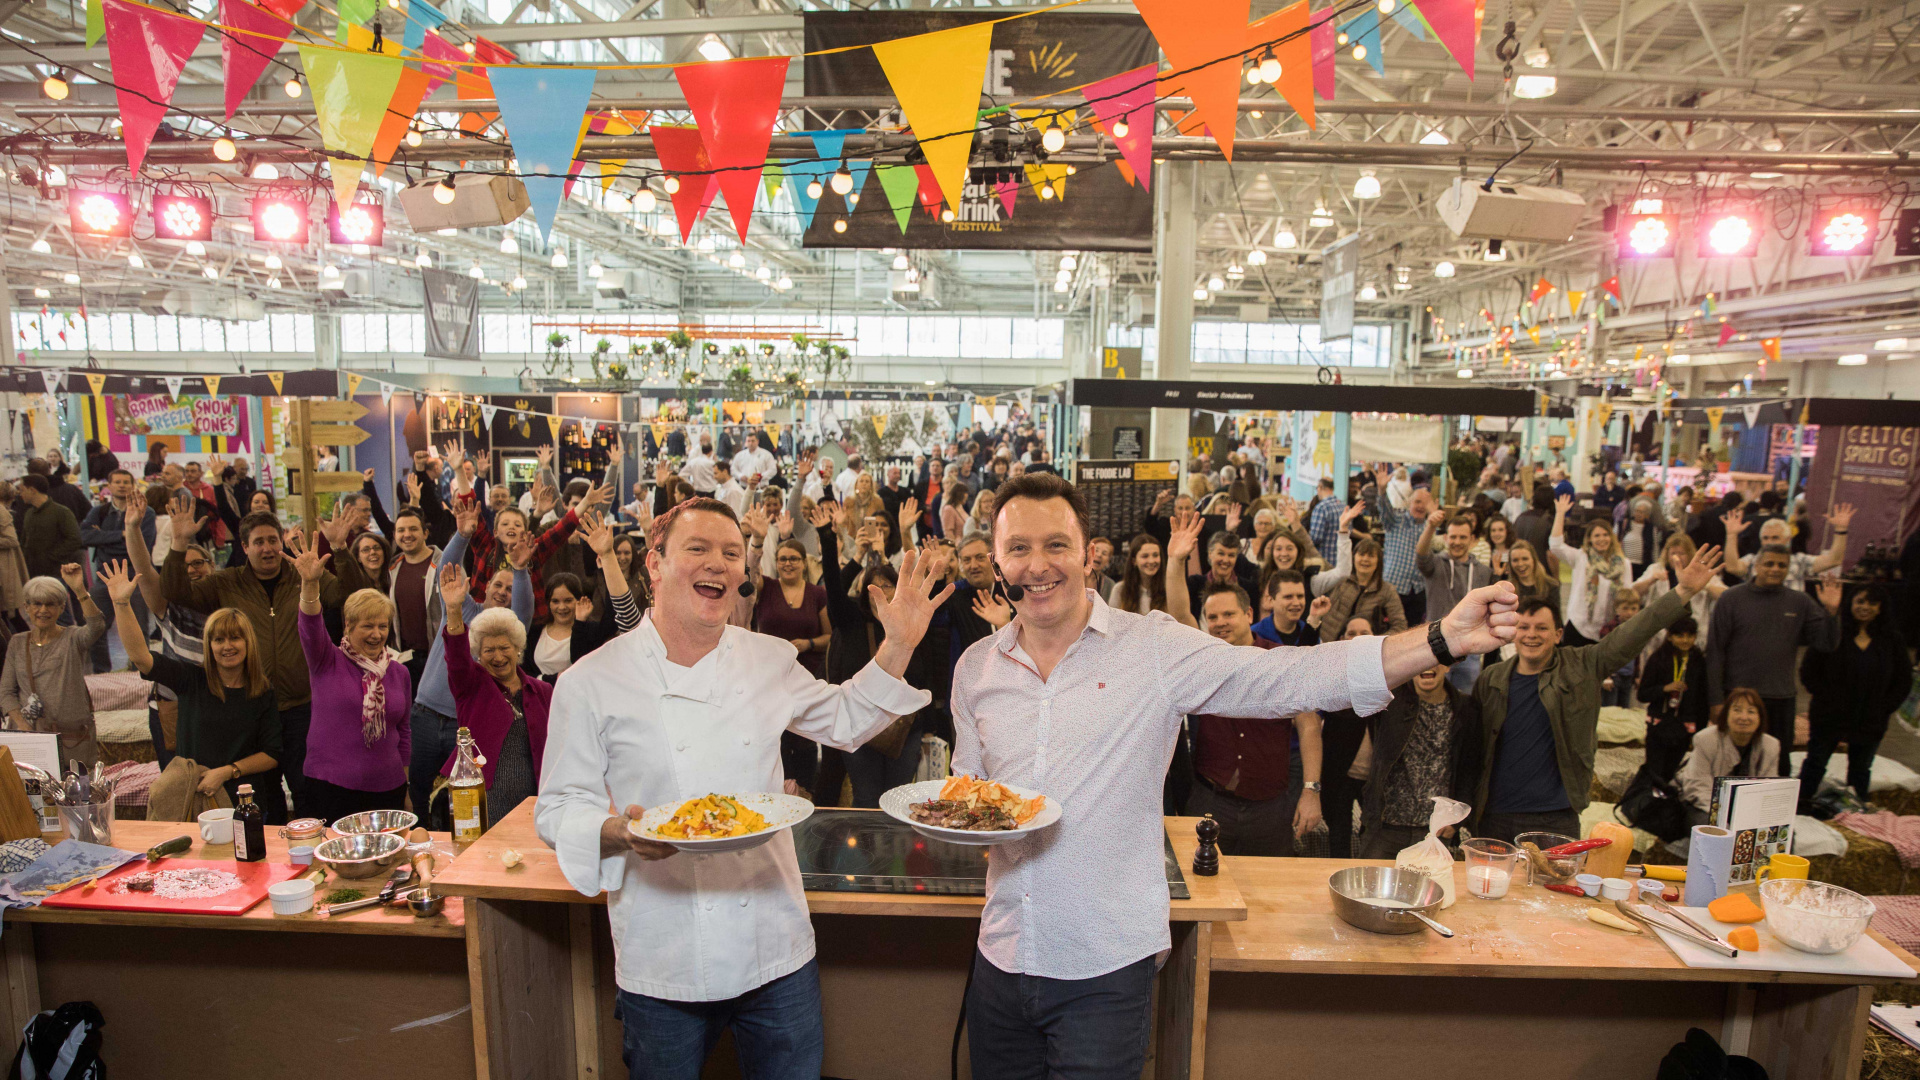 Get free tickets to The Eat & Drink Festival Foodism